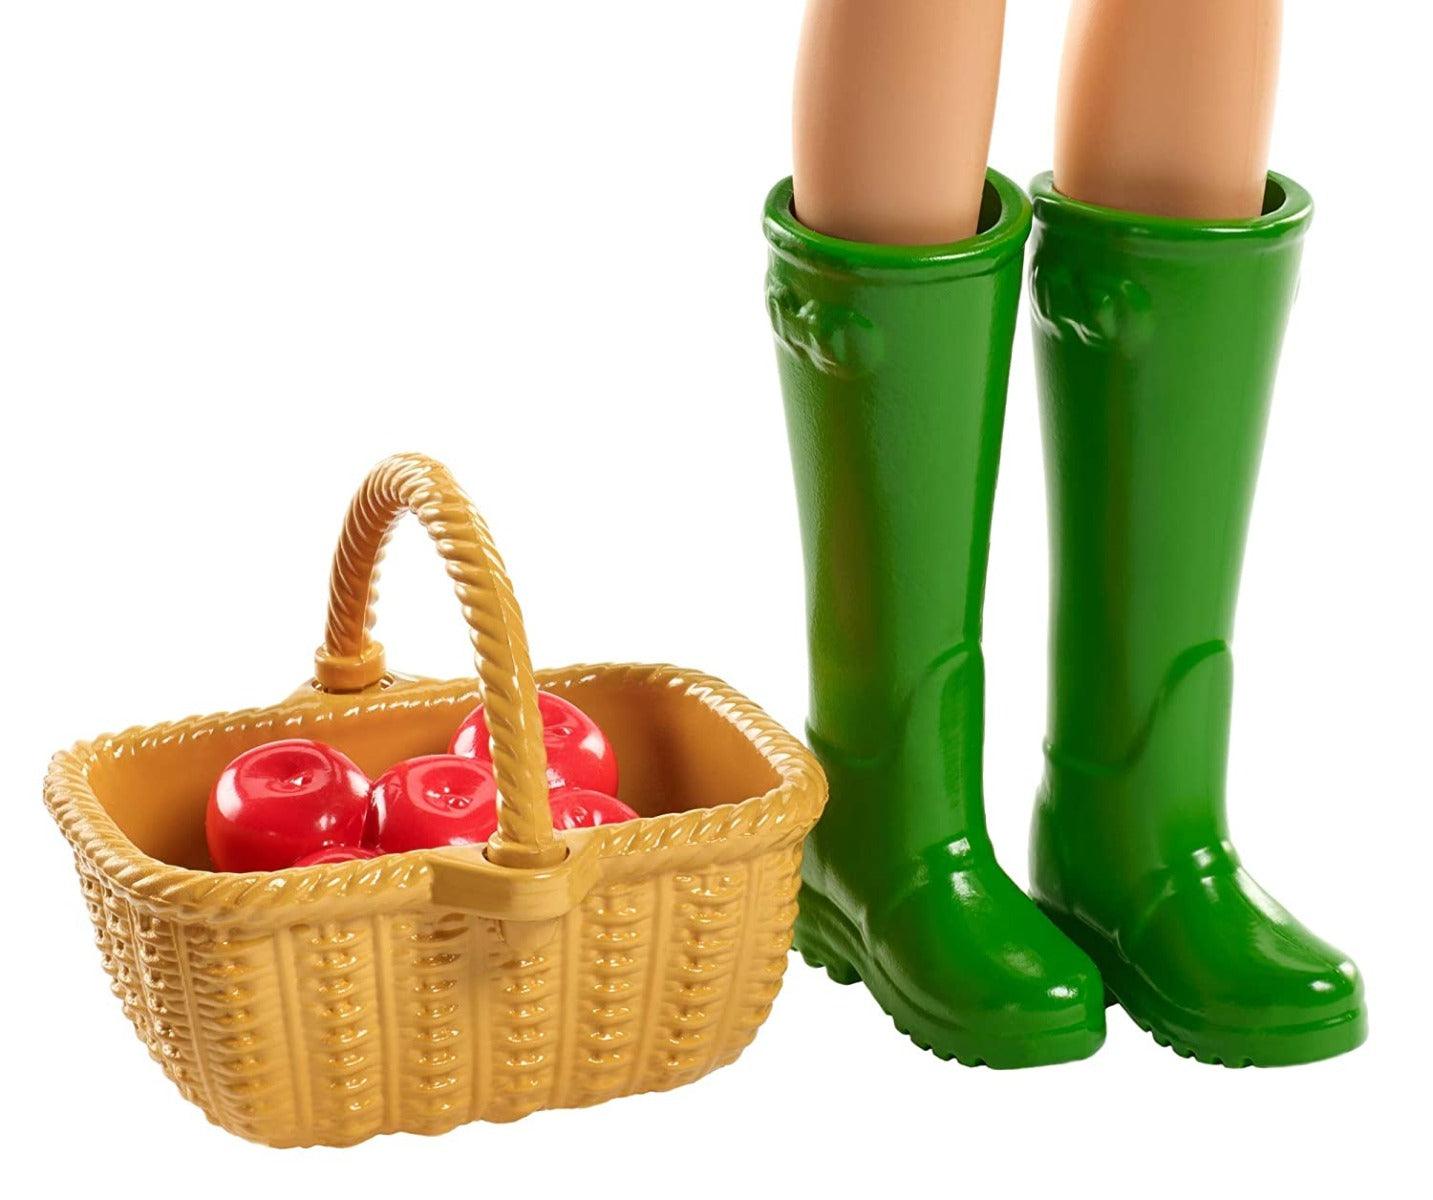 Barbie Sweet Orchard Farm Doll, Blonde with Basket & Apples